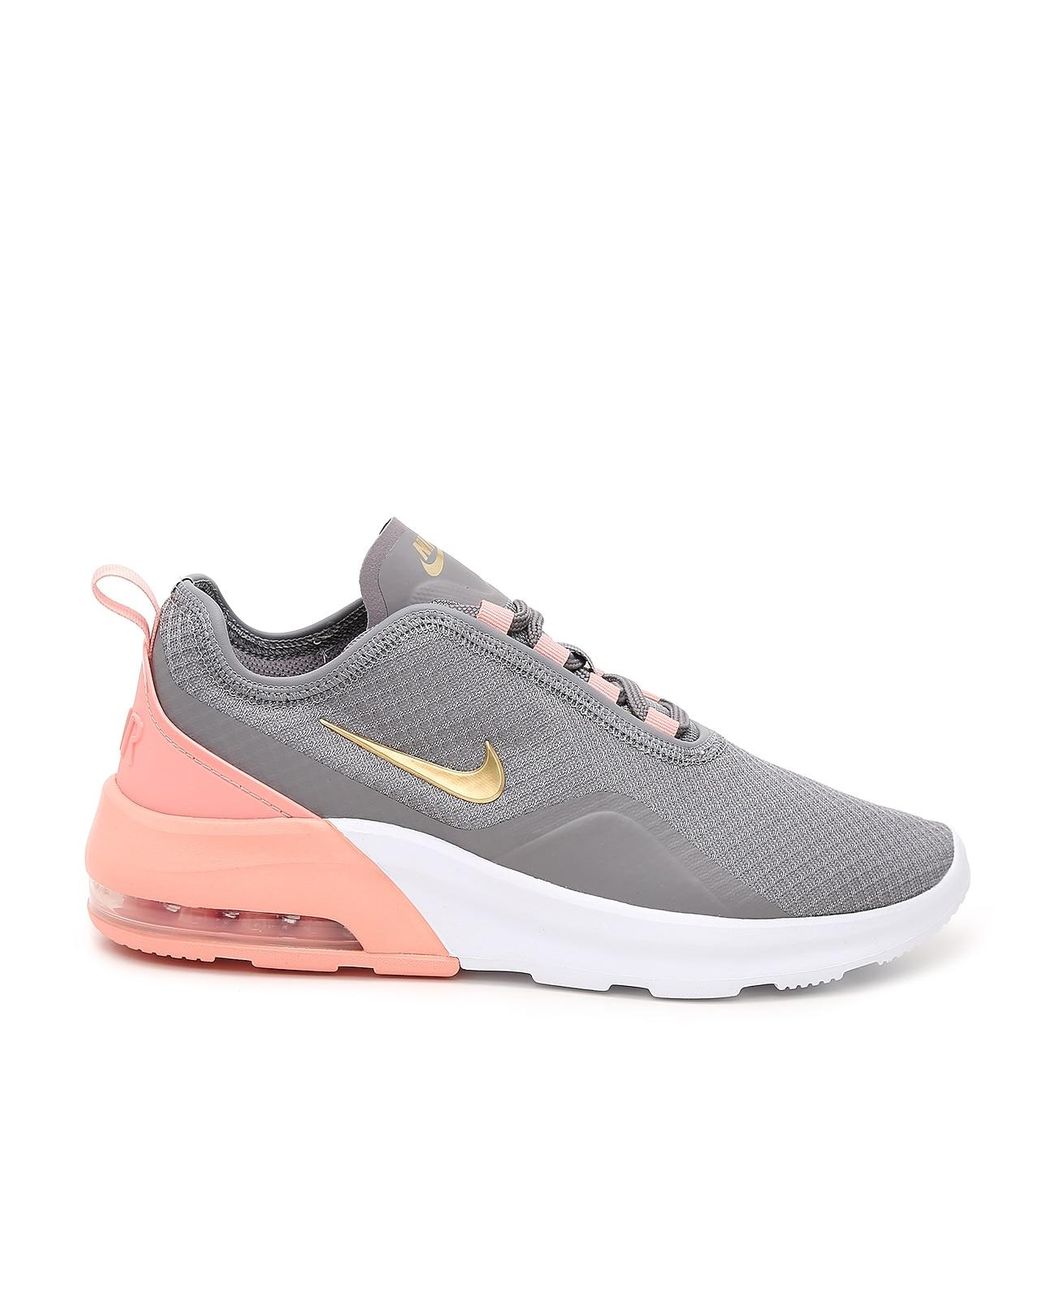 Nike Air Max Motion 2 Shoes in Gray | Lyst